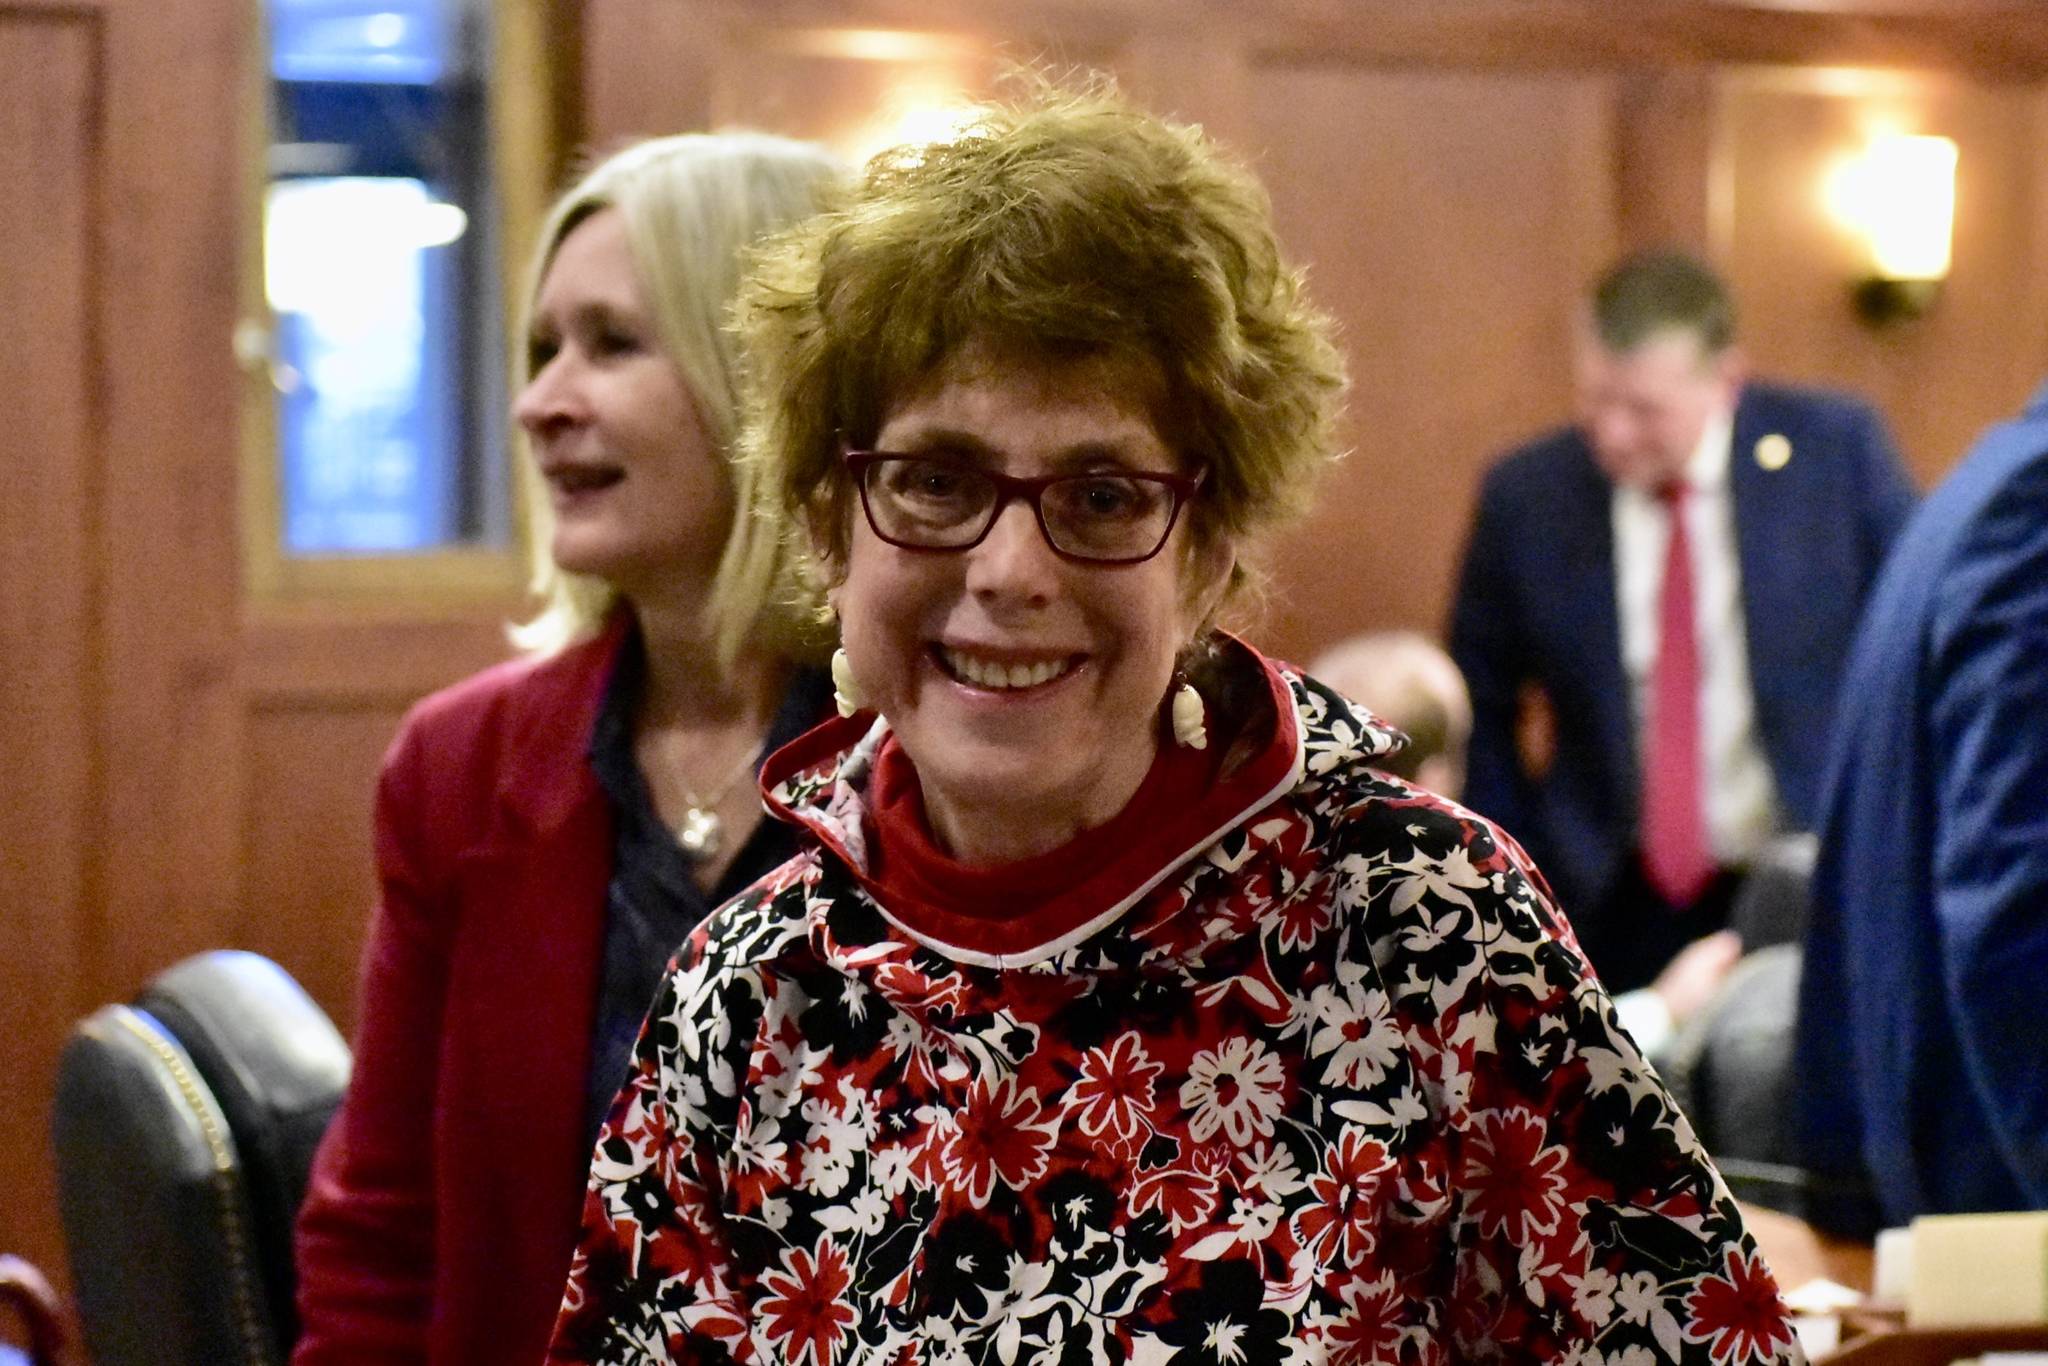 Rep. Gabrielle LeDoux, R-Anchorage, on the floor of the House on Friday, March 13, 2020. Friday afternoon, the Department of Law announced charges had been filed against LeDoux.(Peter Segall | Juneau Empire)